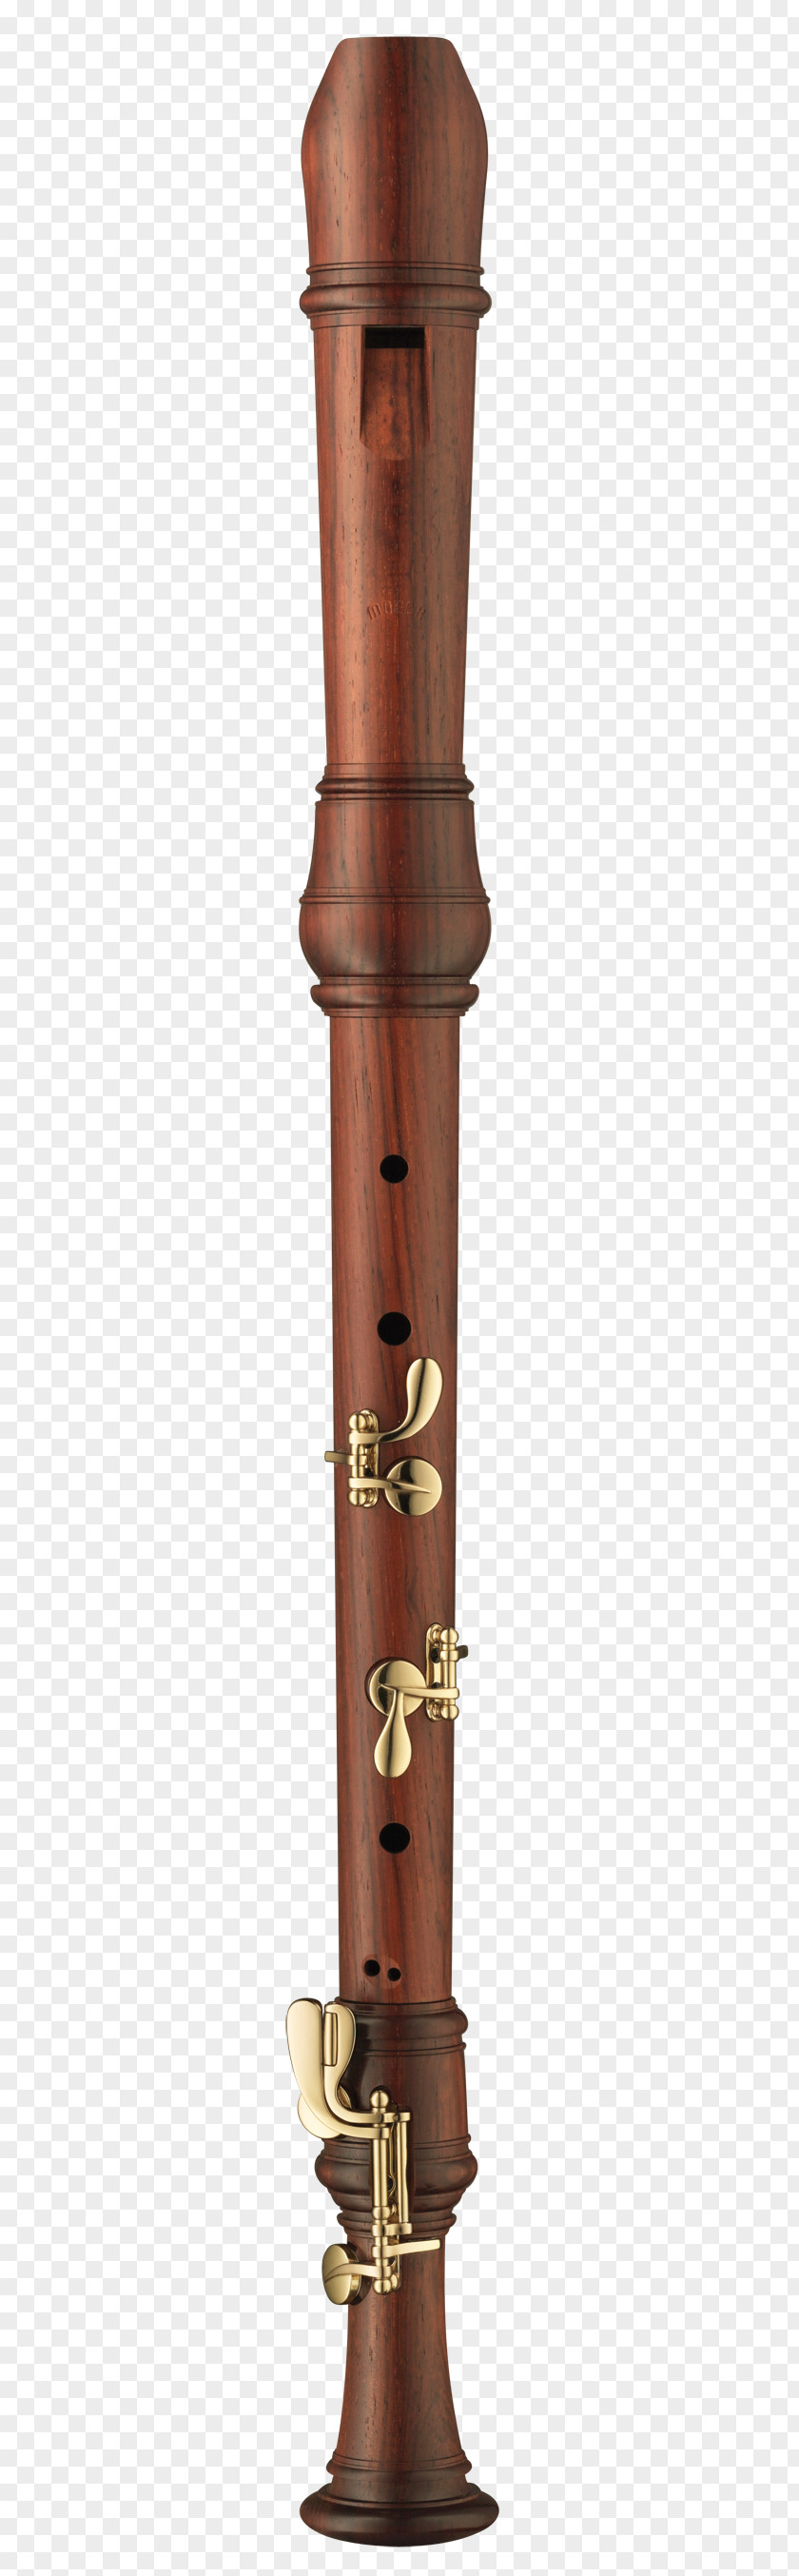 Tenor Recorder Copper 01504 Brass PNG